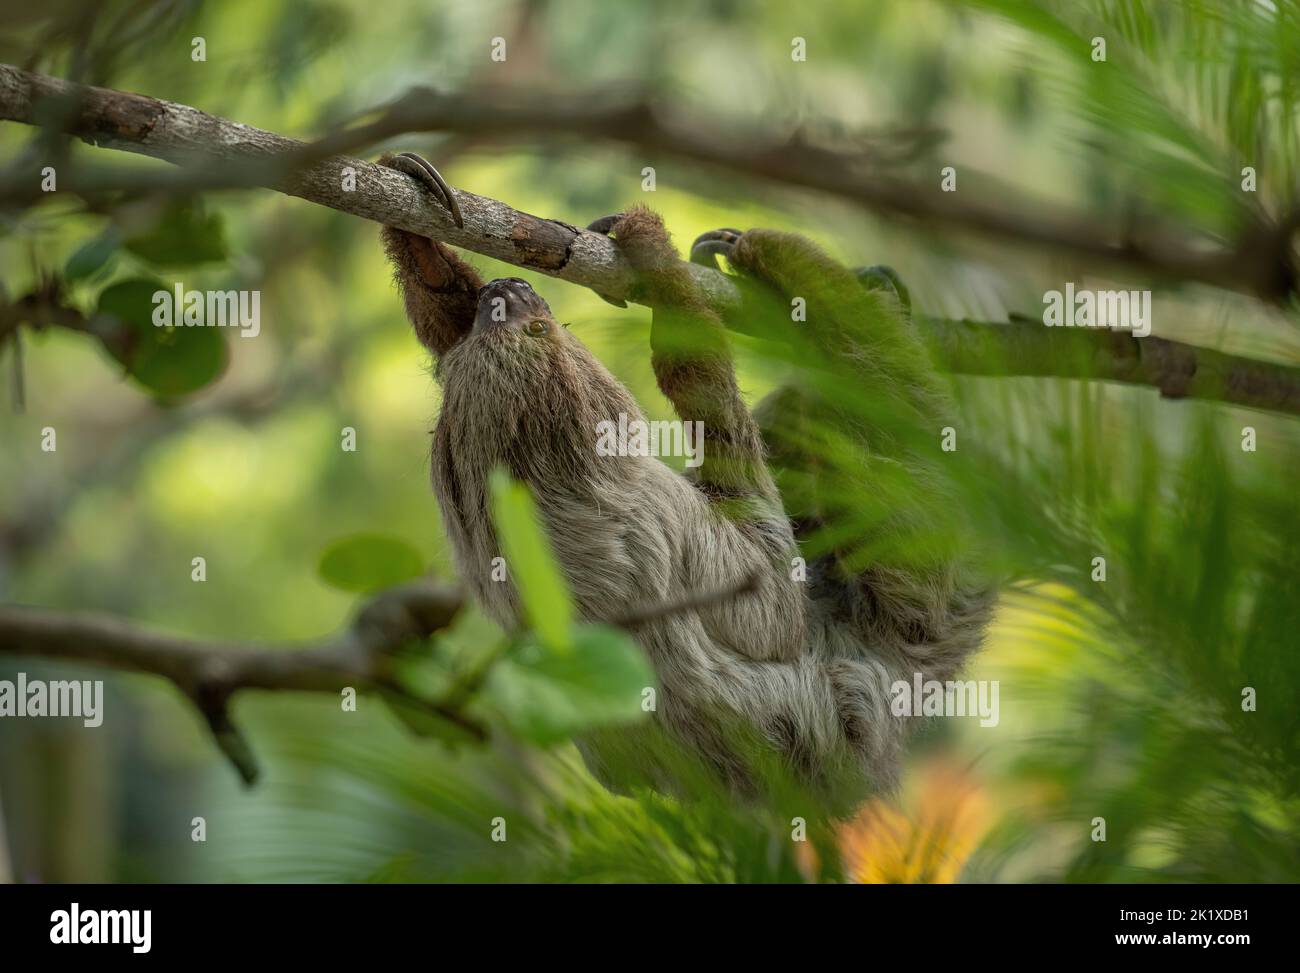 A closeup of Linnaeus's two-toed sloth, Choloepus didactylus hanging from the branch. Stock Photo